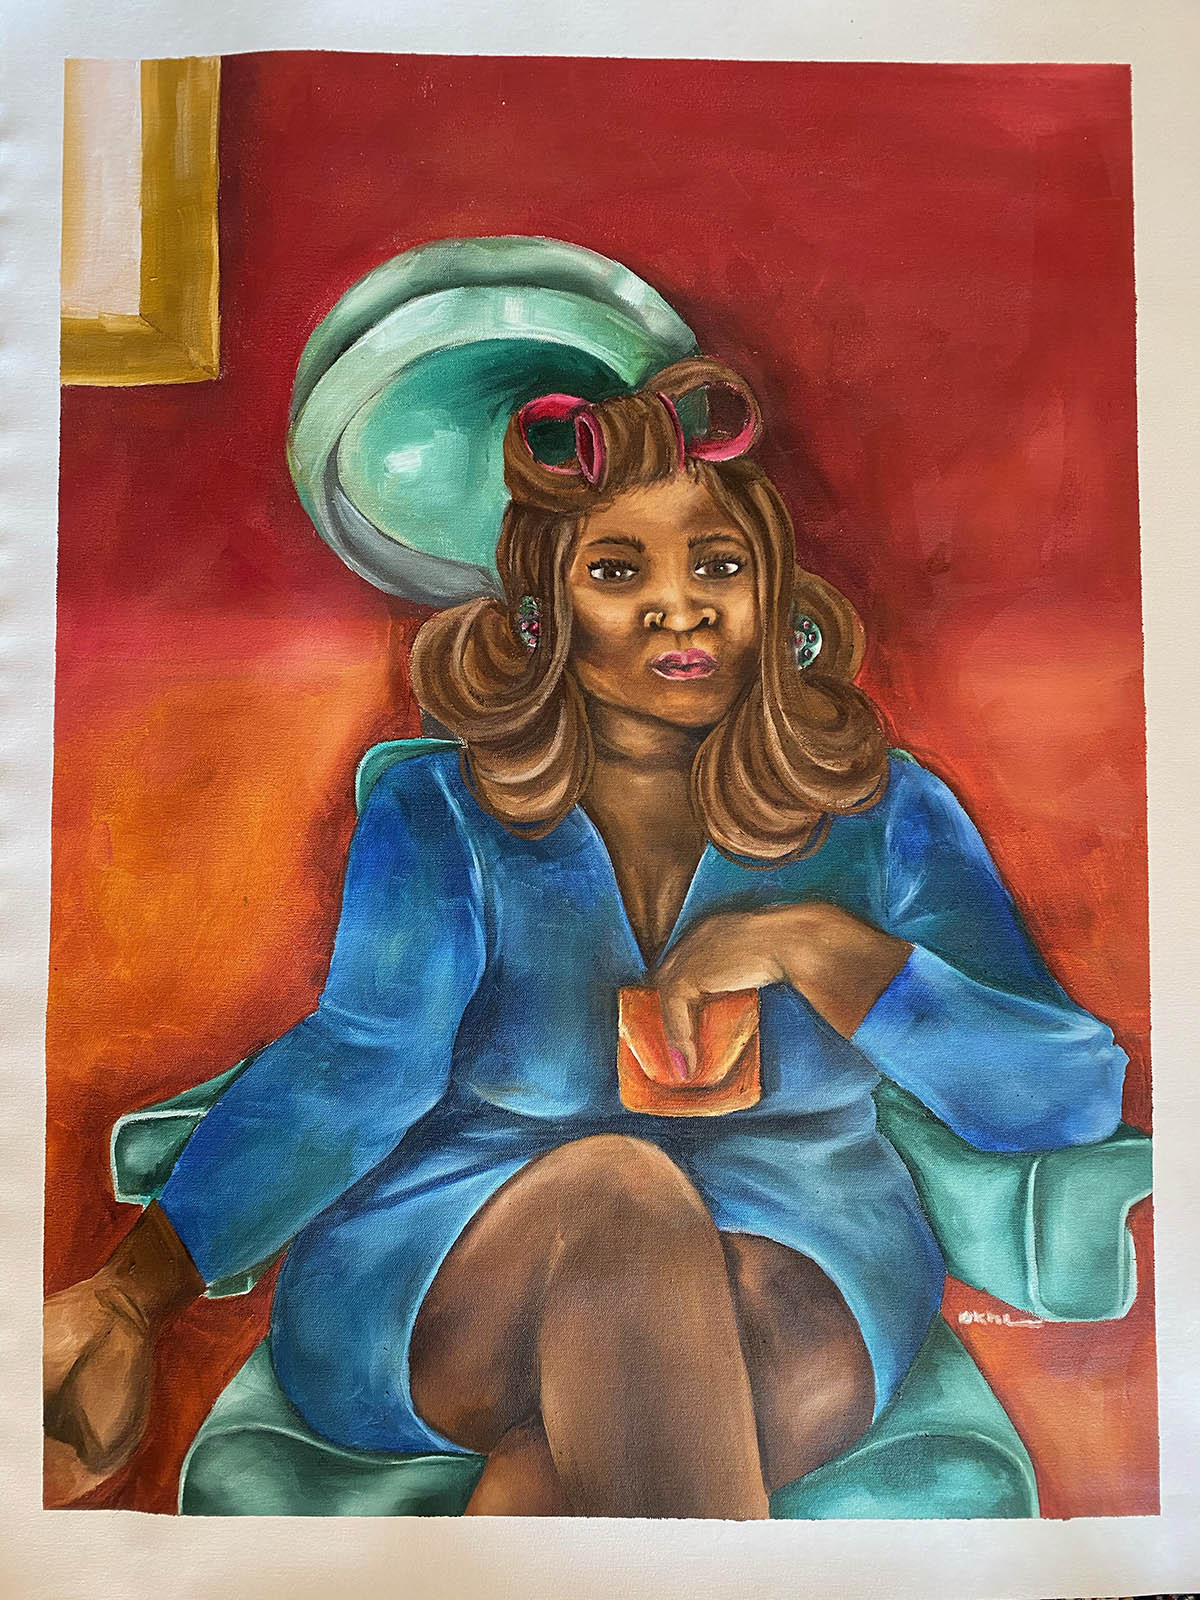 Mookho Ntho, ‘Under the Dryer II,’ oil on canvas,78 x 100 cm, 2021.Courtesy of the artist and of ADA contemporary art gallery